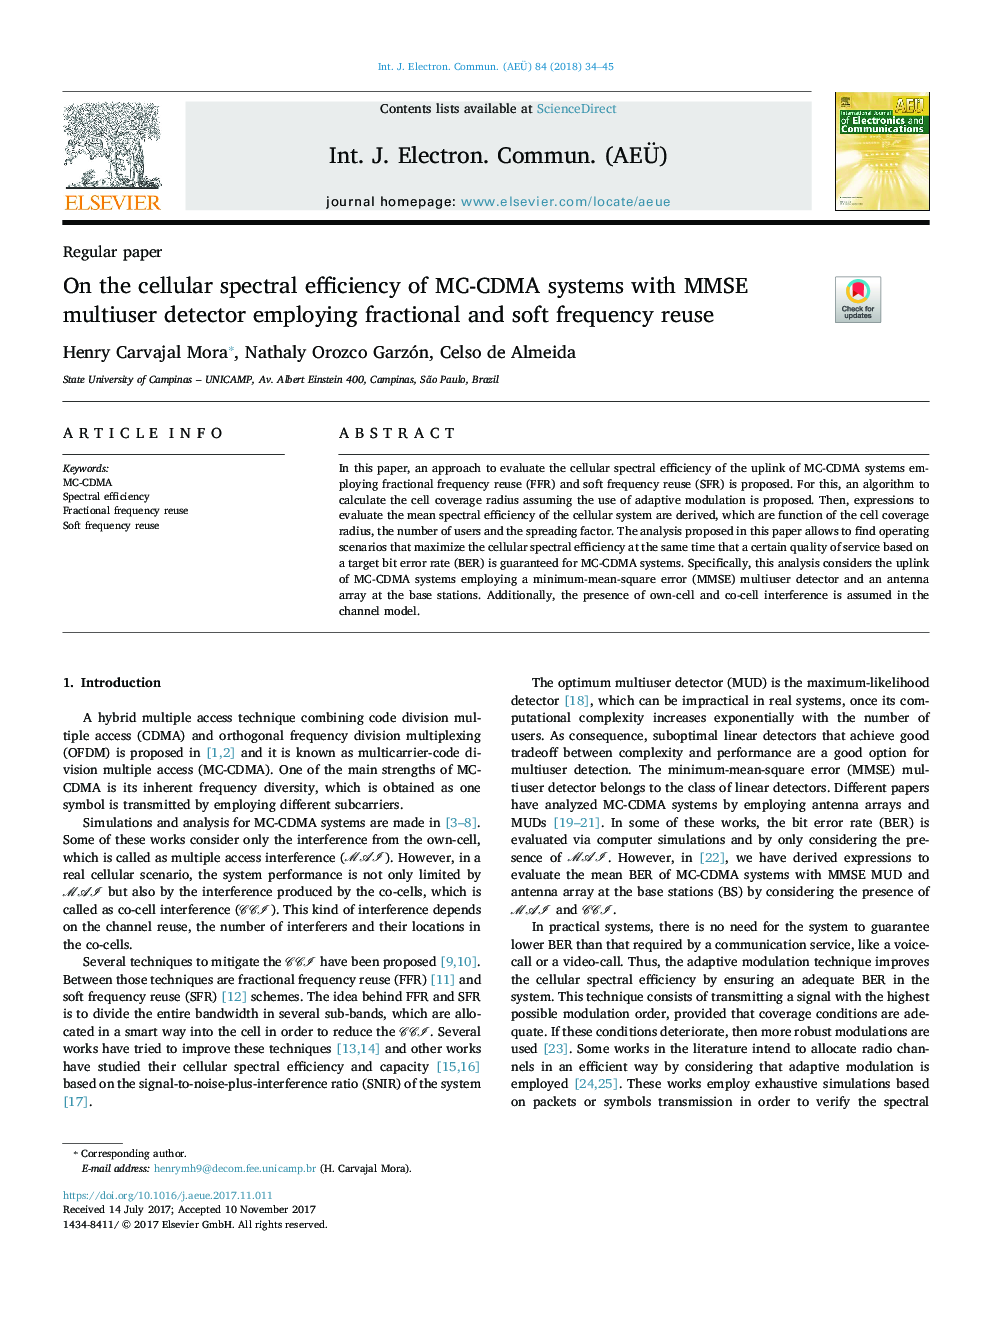 On the cellular spectral efficiency of MC-CDMA systems with MMSE multiuser detector employing fractional and soft frequency reuse